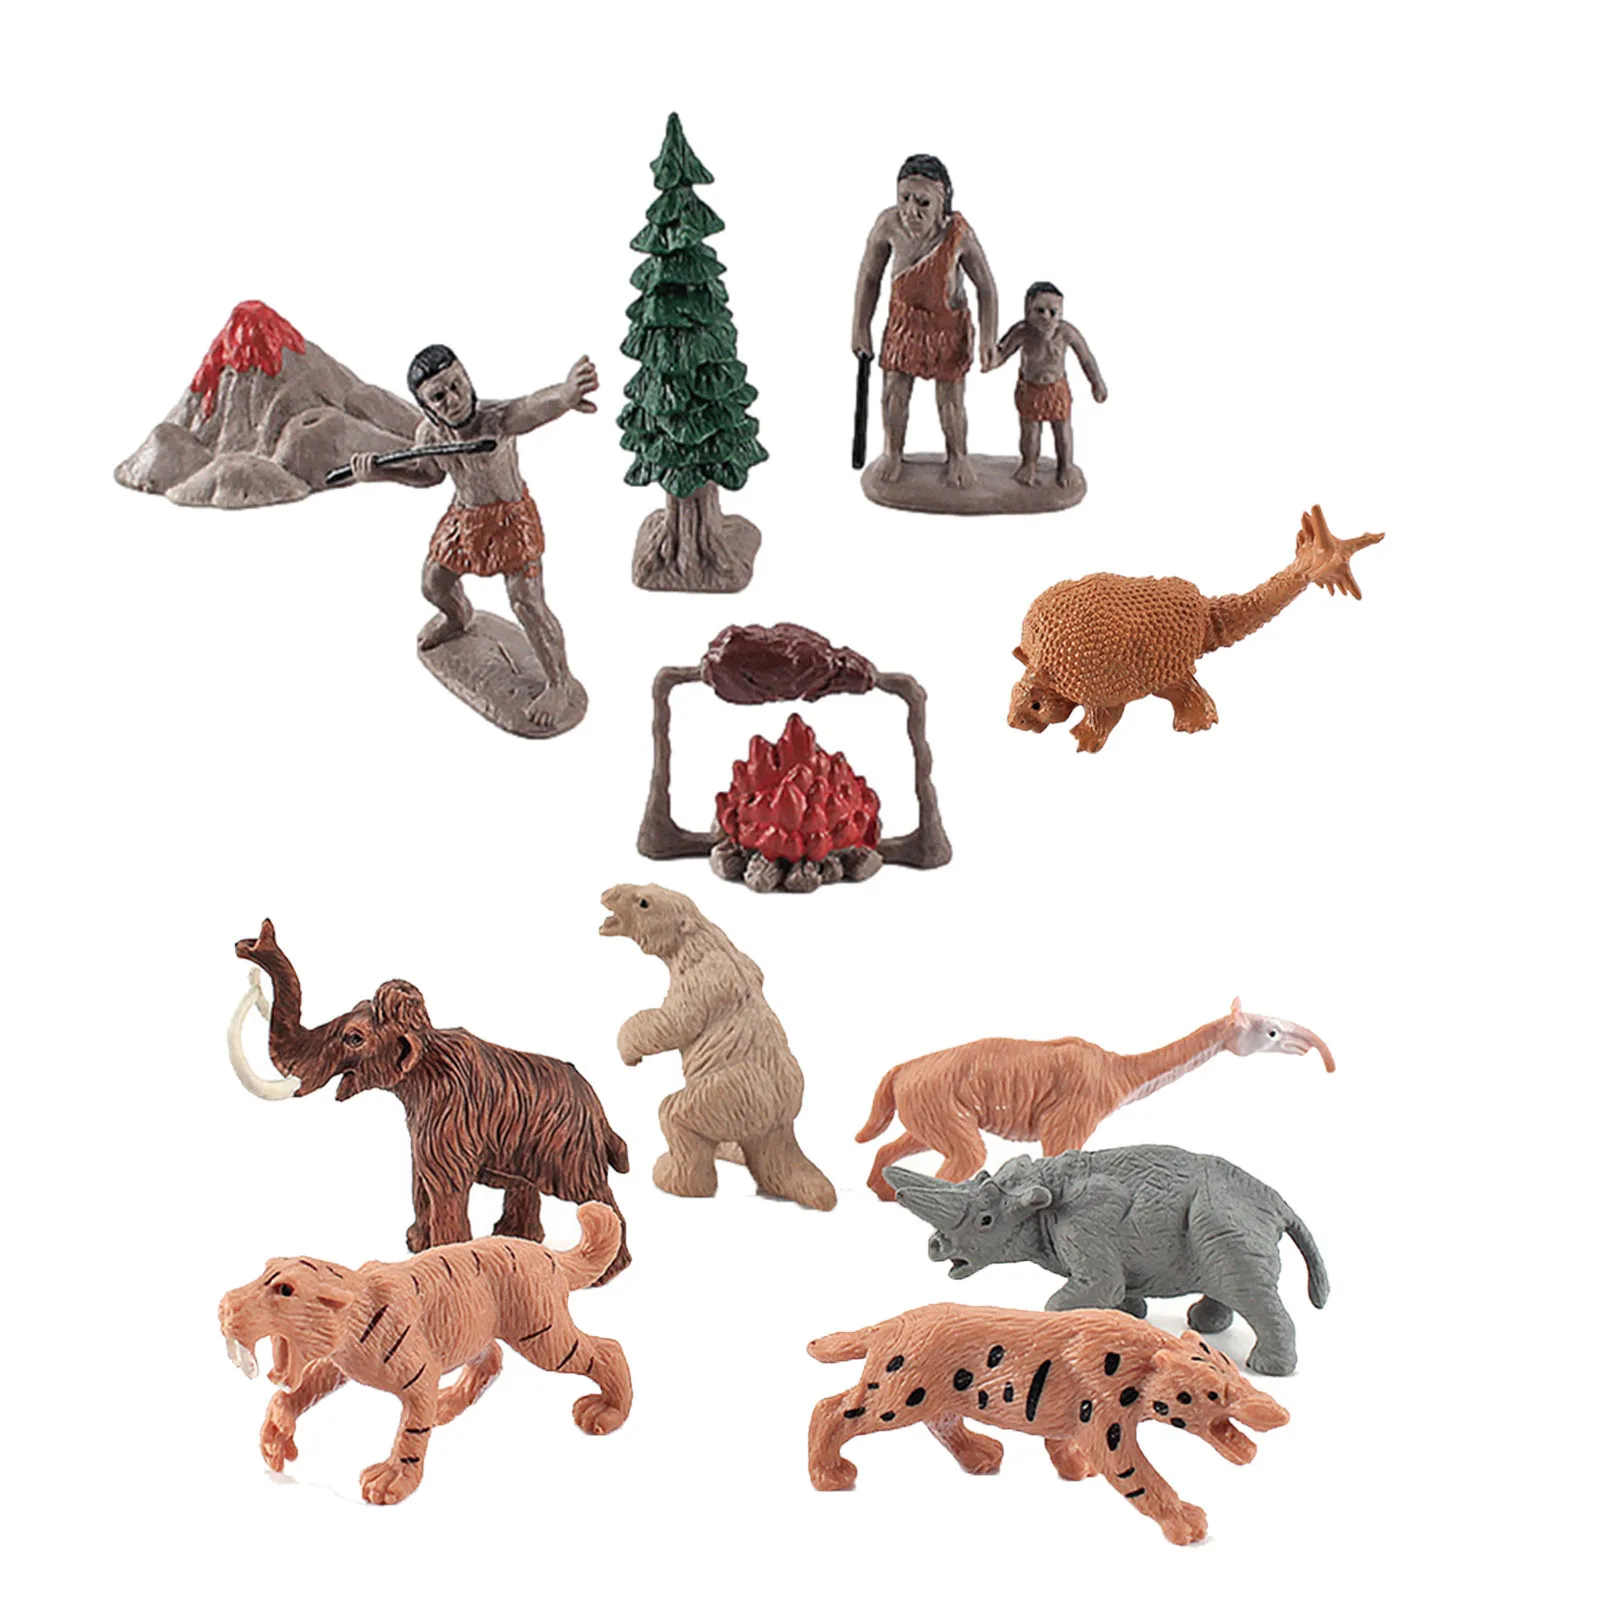 

12pcs Prehistoric Savage Life Action Figures Primitive Human Evolution People Model Figurine Early Education Cute Kid Toy Gifts